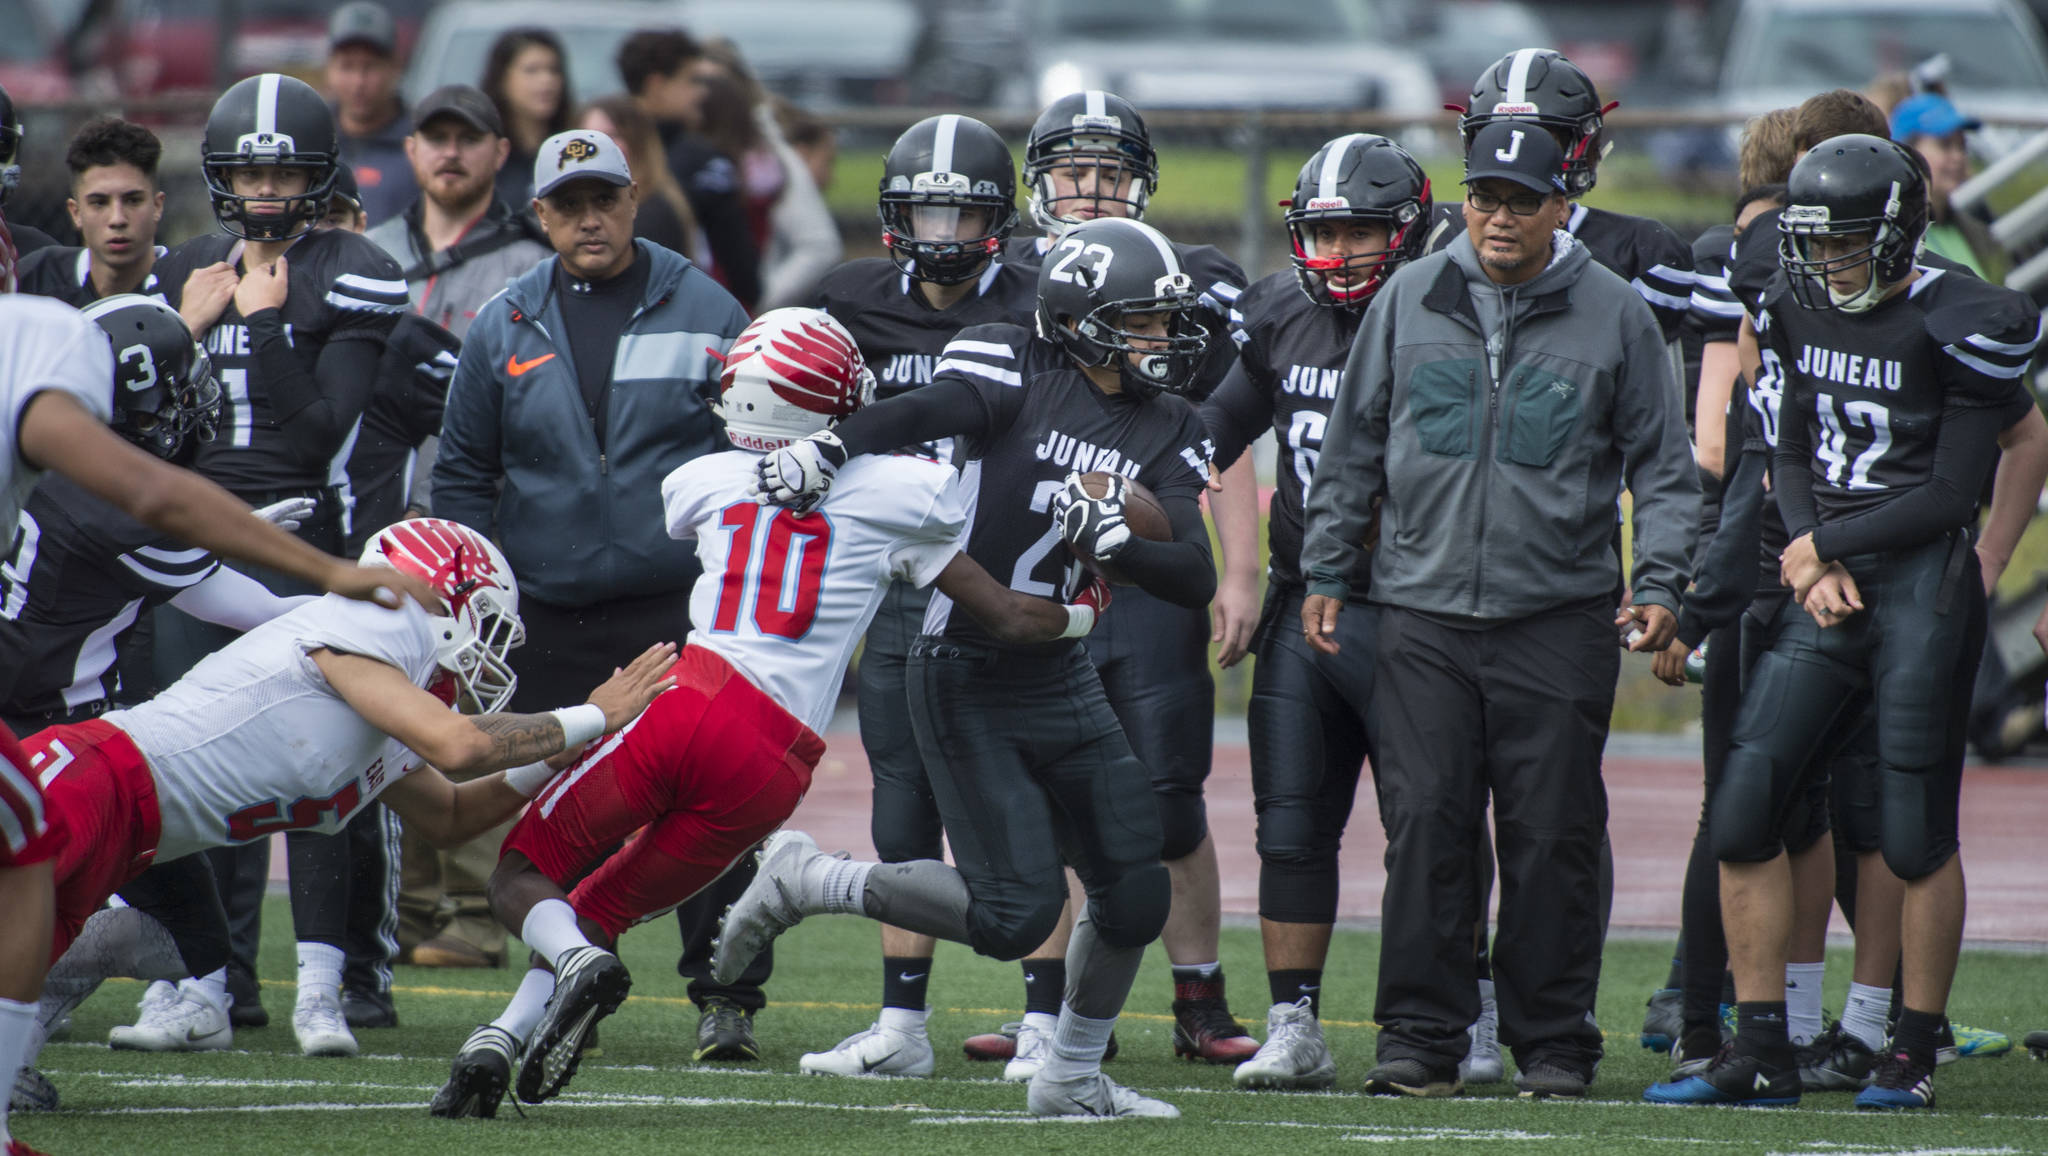 Juneau Football’s Cody Morehouse, center, is forced out of bounds by East’s Alex Hinton at Adair-Kennedy Memorial Field on Saturday, Aug. 25, 2018. East won 40-0. (Michael Penn | Juneau Empire)